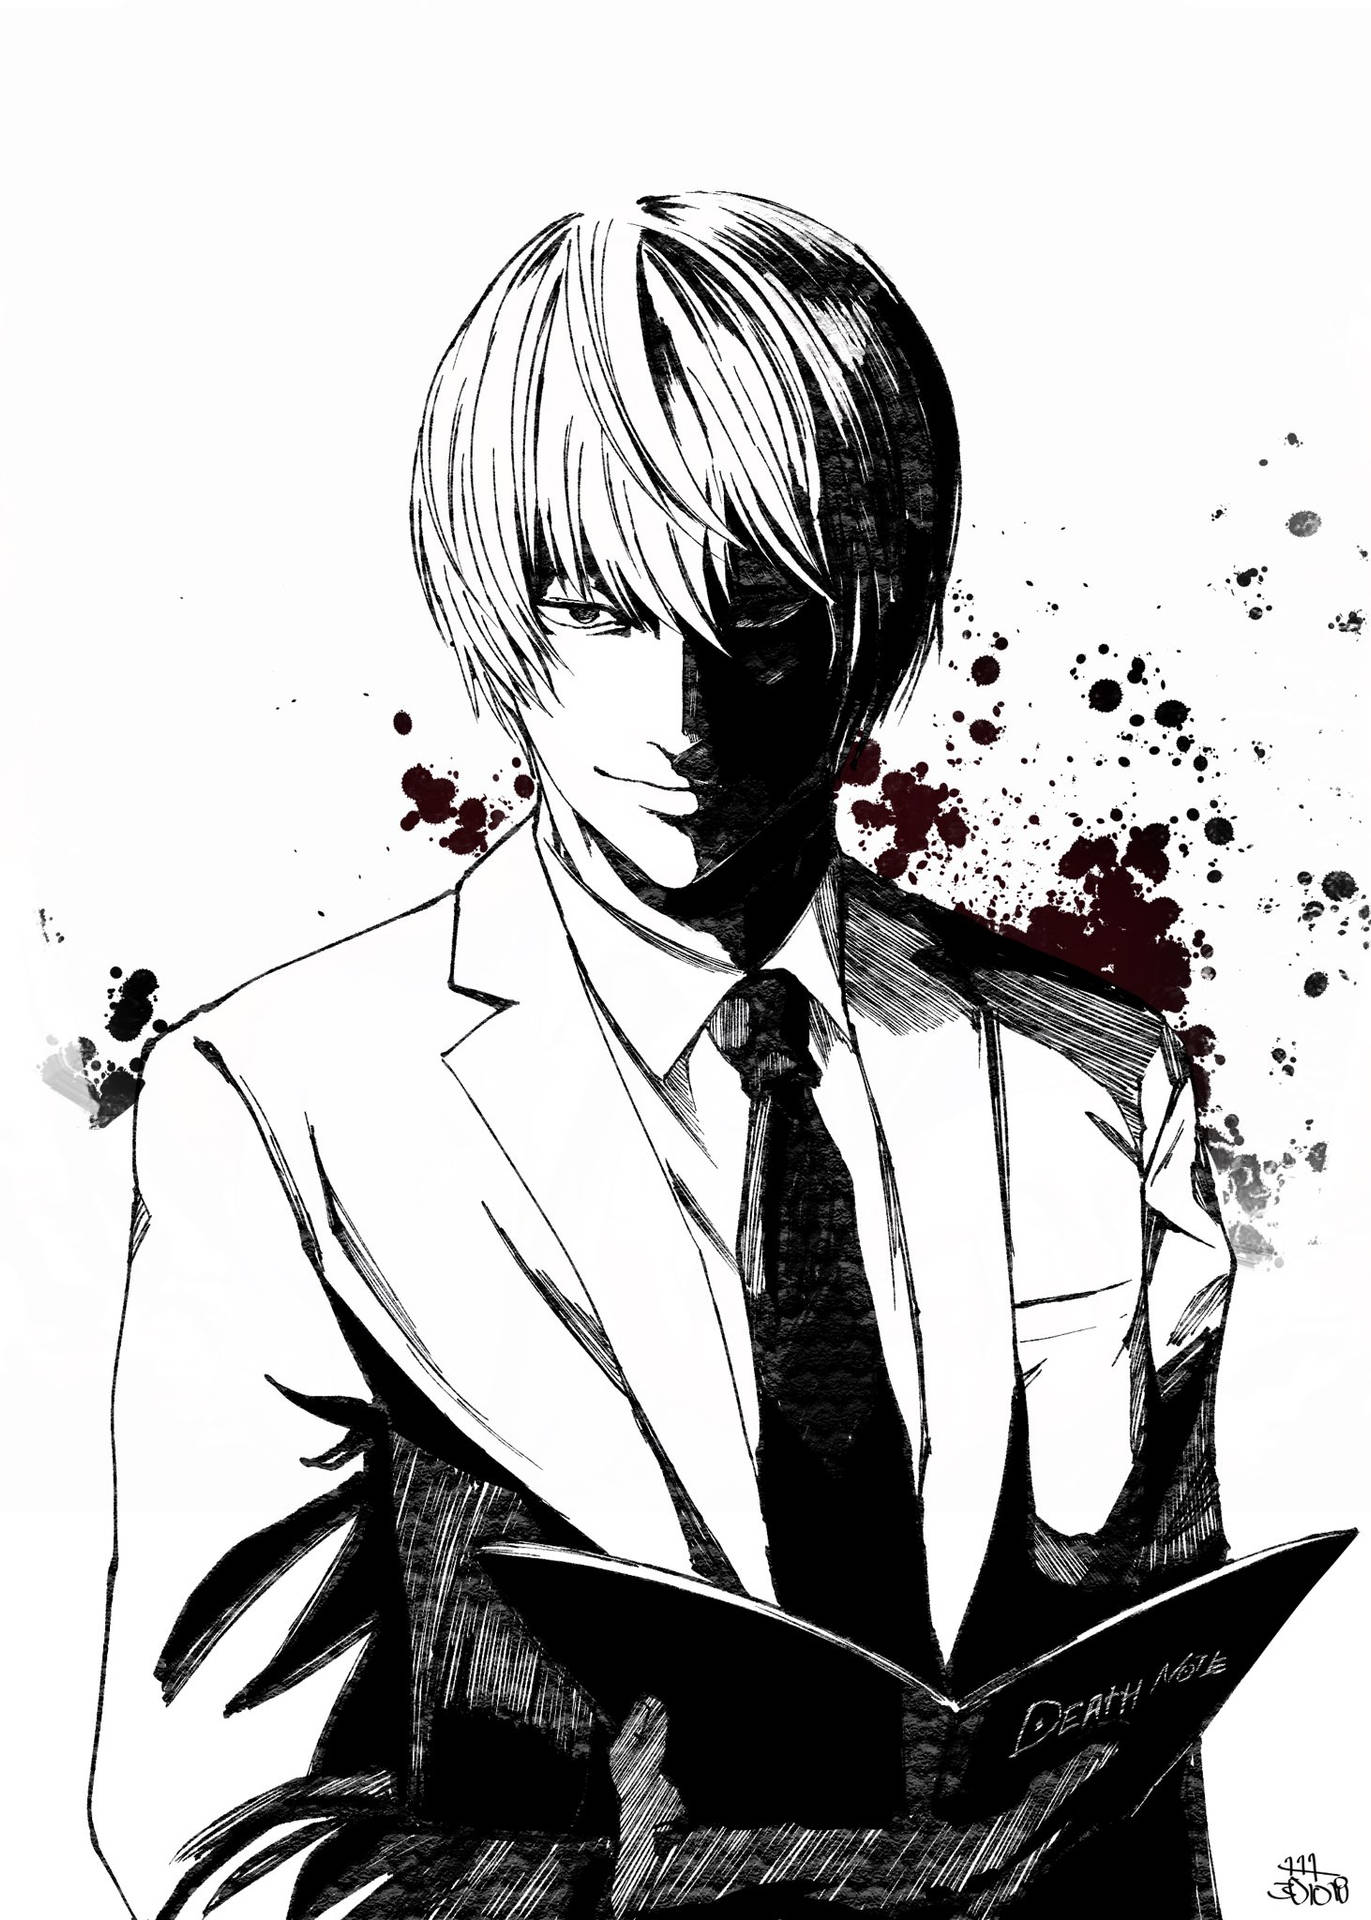 Light Yagami of Death Note by DamnedCat51 on DeviantArt